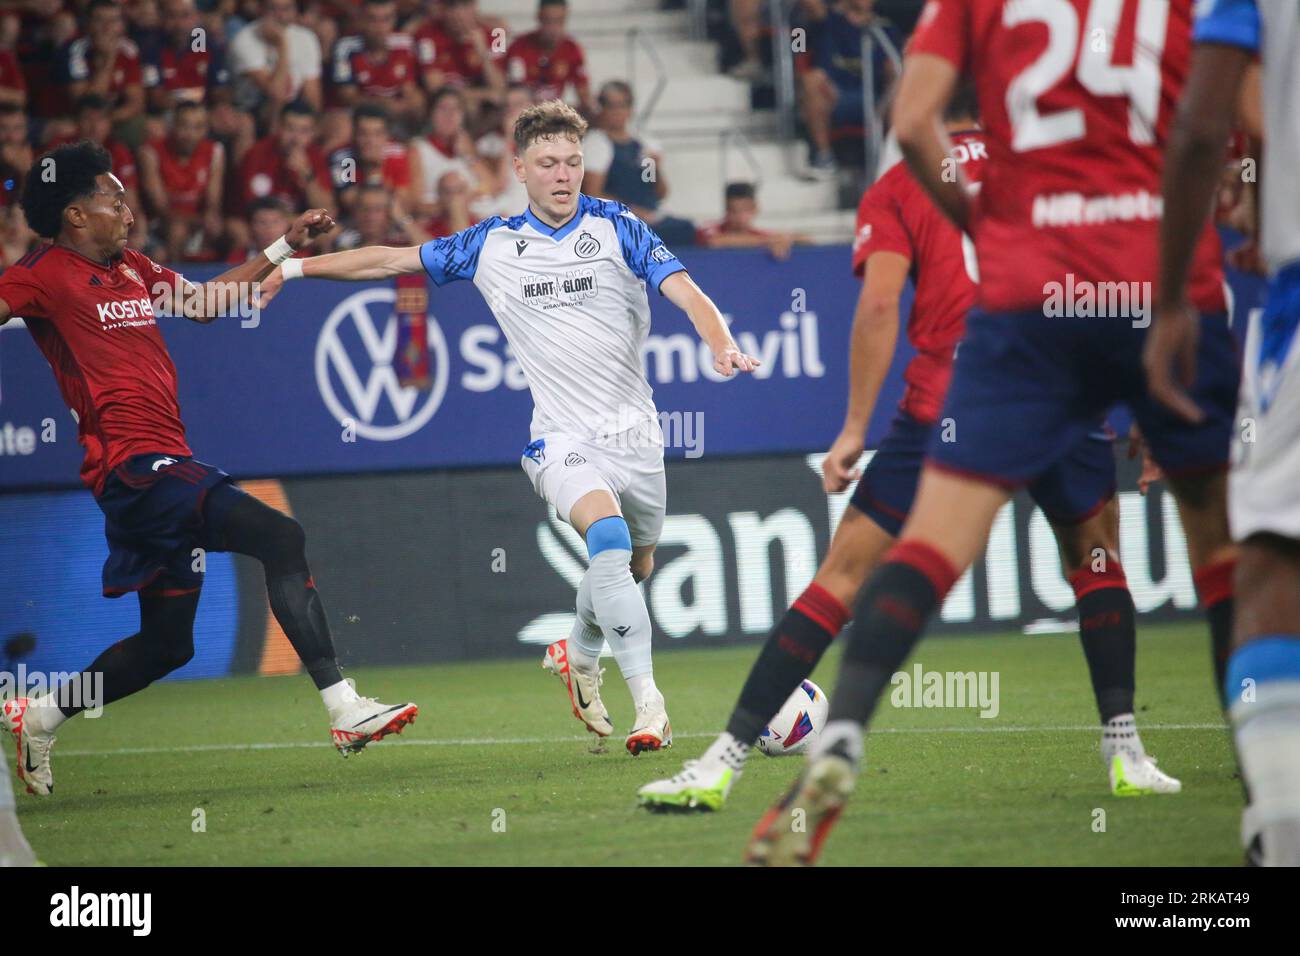 Pamplona, Spain, 24th August, 2023: Club Brugge's player, Andreas Sven Olsen (7) is about to shoot in front of several rivals during the first leg of the previous round of the UEFA Europa Conference League 2023-24 between CA Osasuna and Club Brugge at the El Sadar Stadium, in Pamplona, on August 24, 2023. Credit: Alberto Brevers / Alamy Live News. Stock Photo